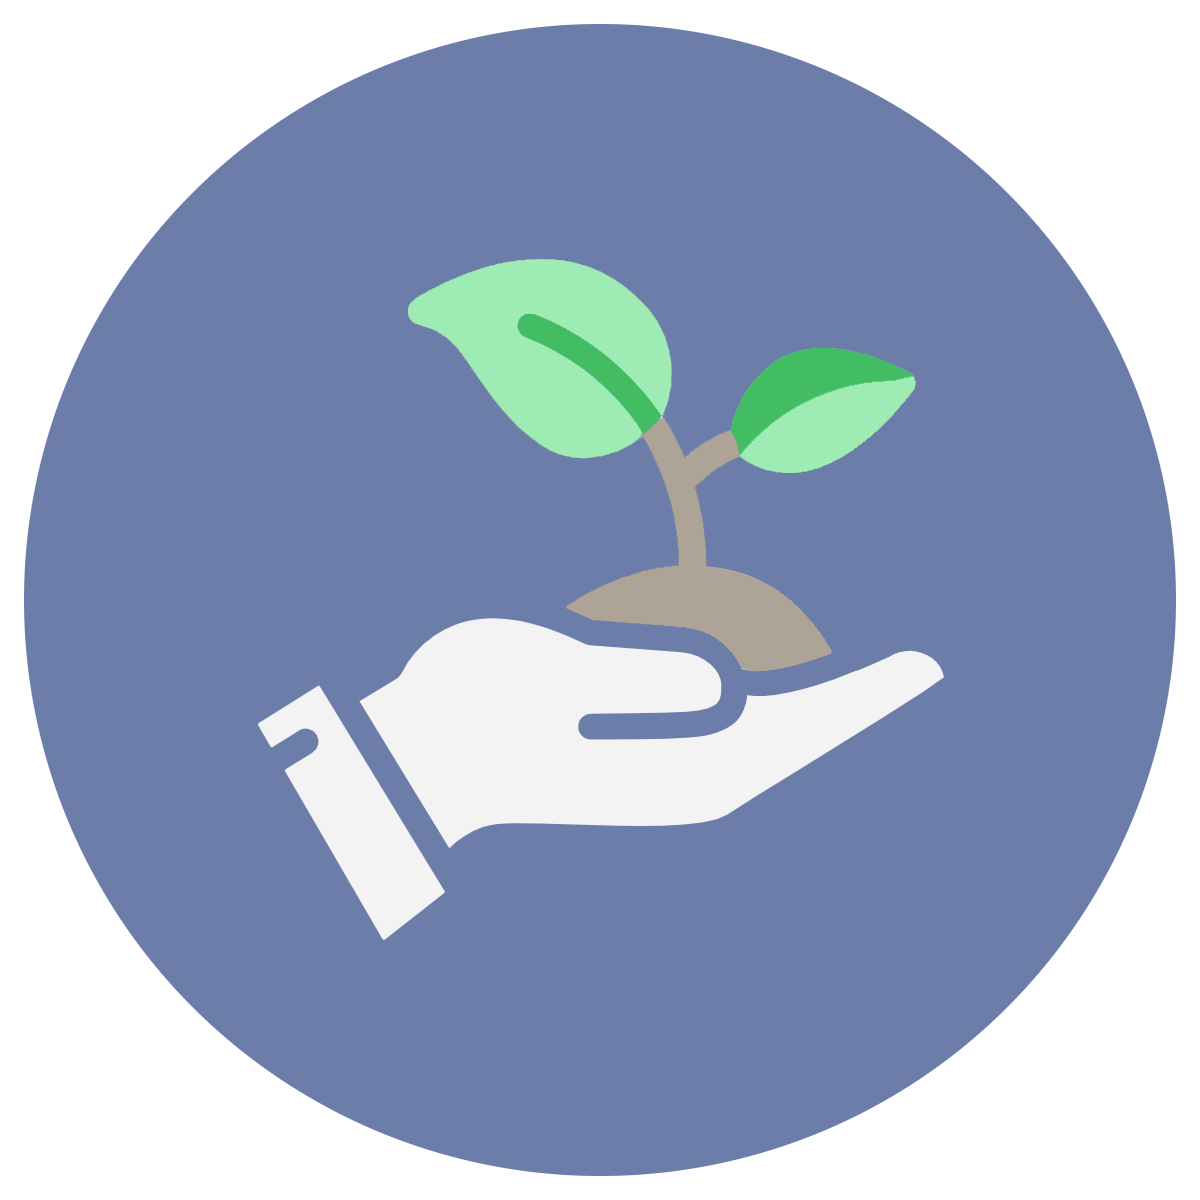 icon depicting environmental care